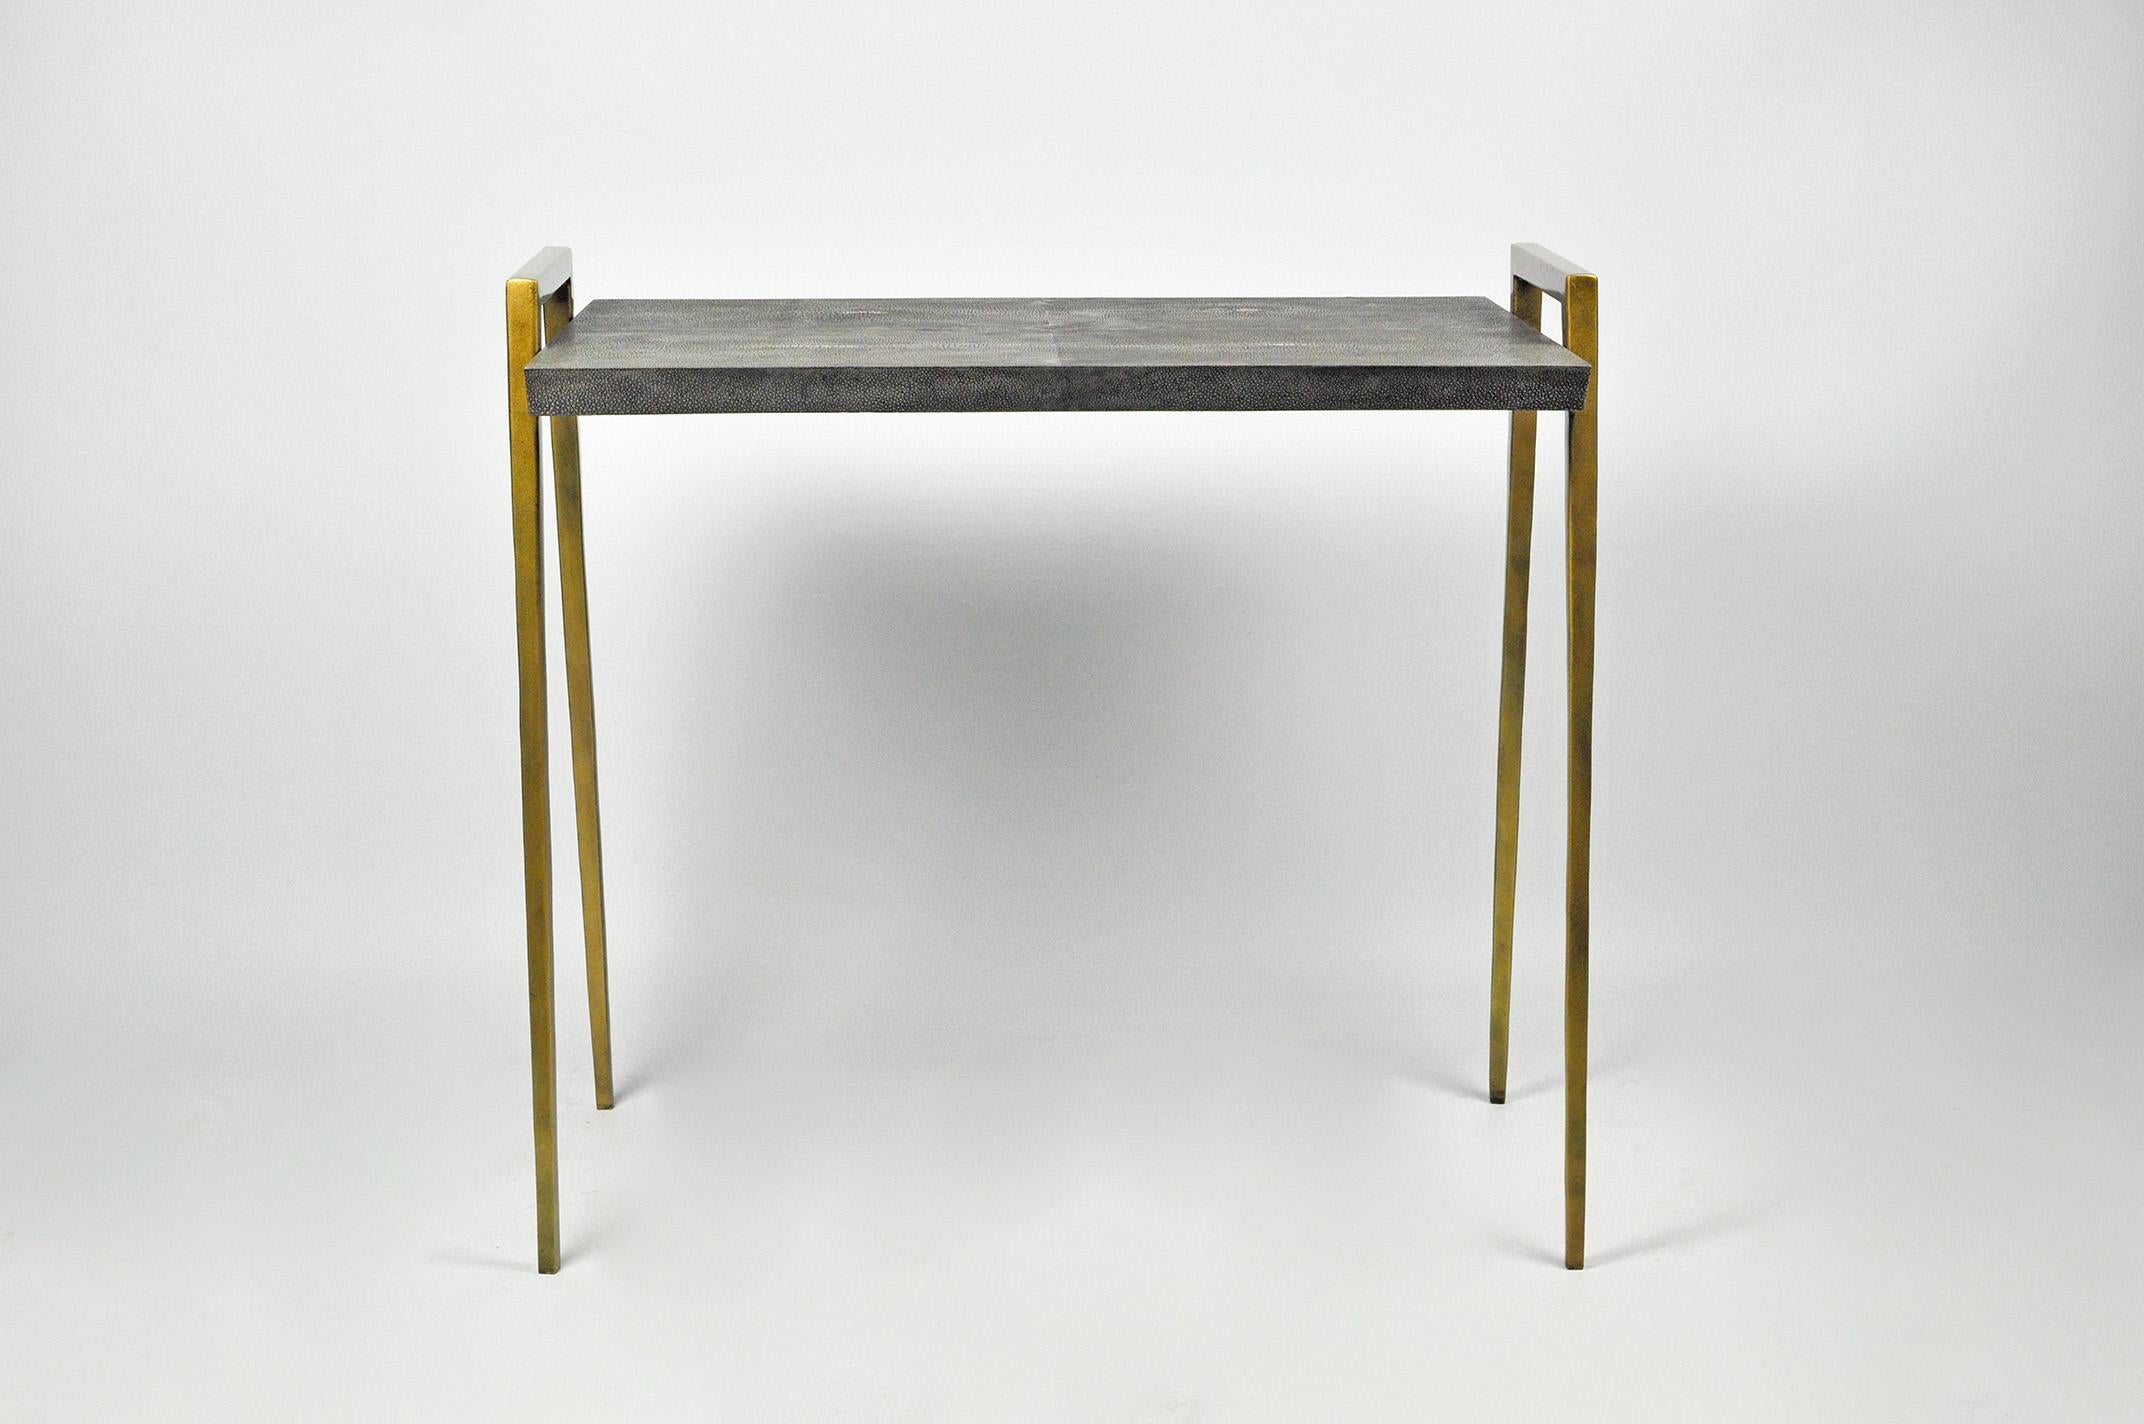 The Meteor side table is made of dark grey shagreen.
The feet are in metal with an old brass patina.

The dimensions of this piece are 25